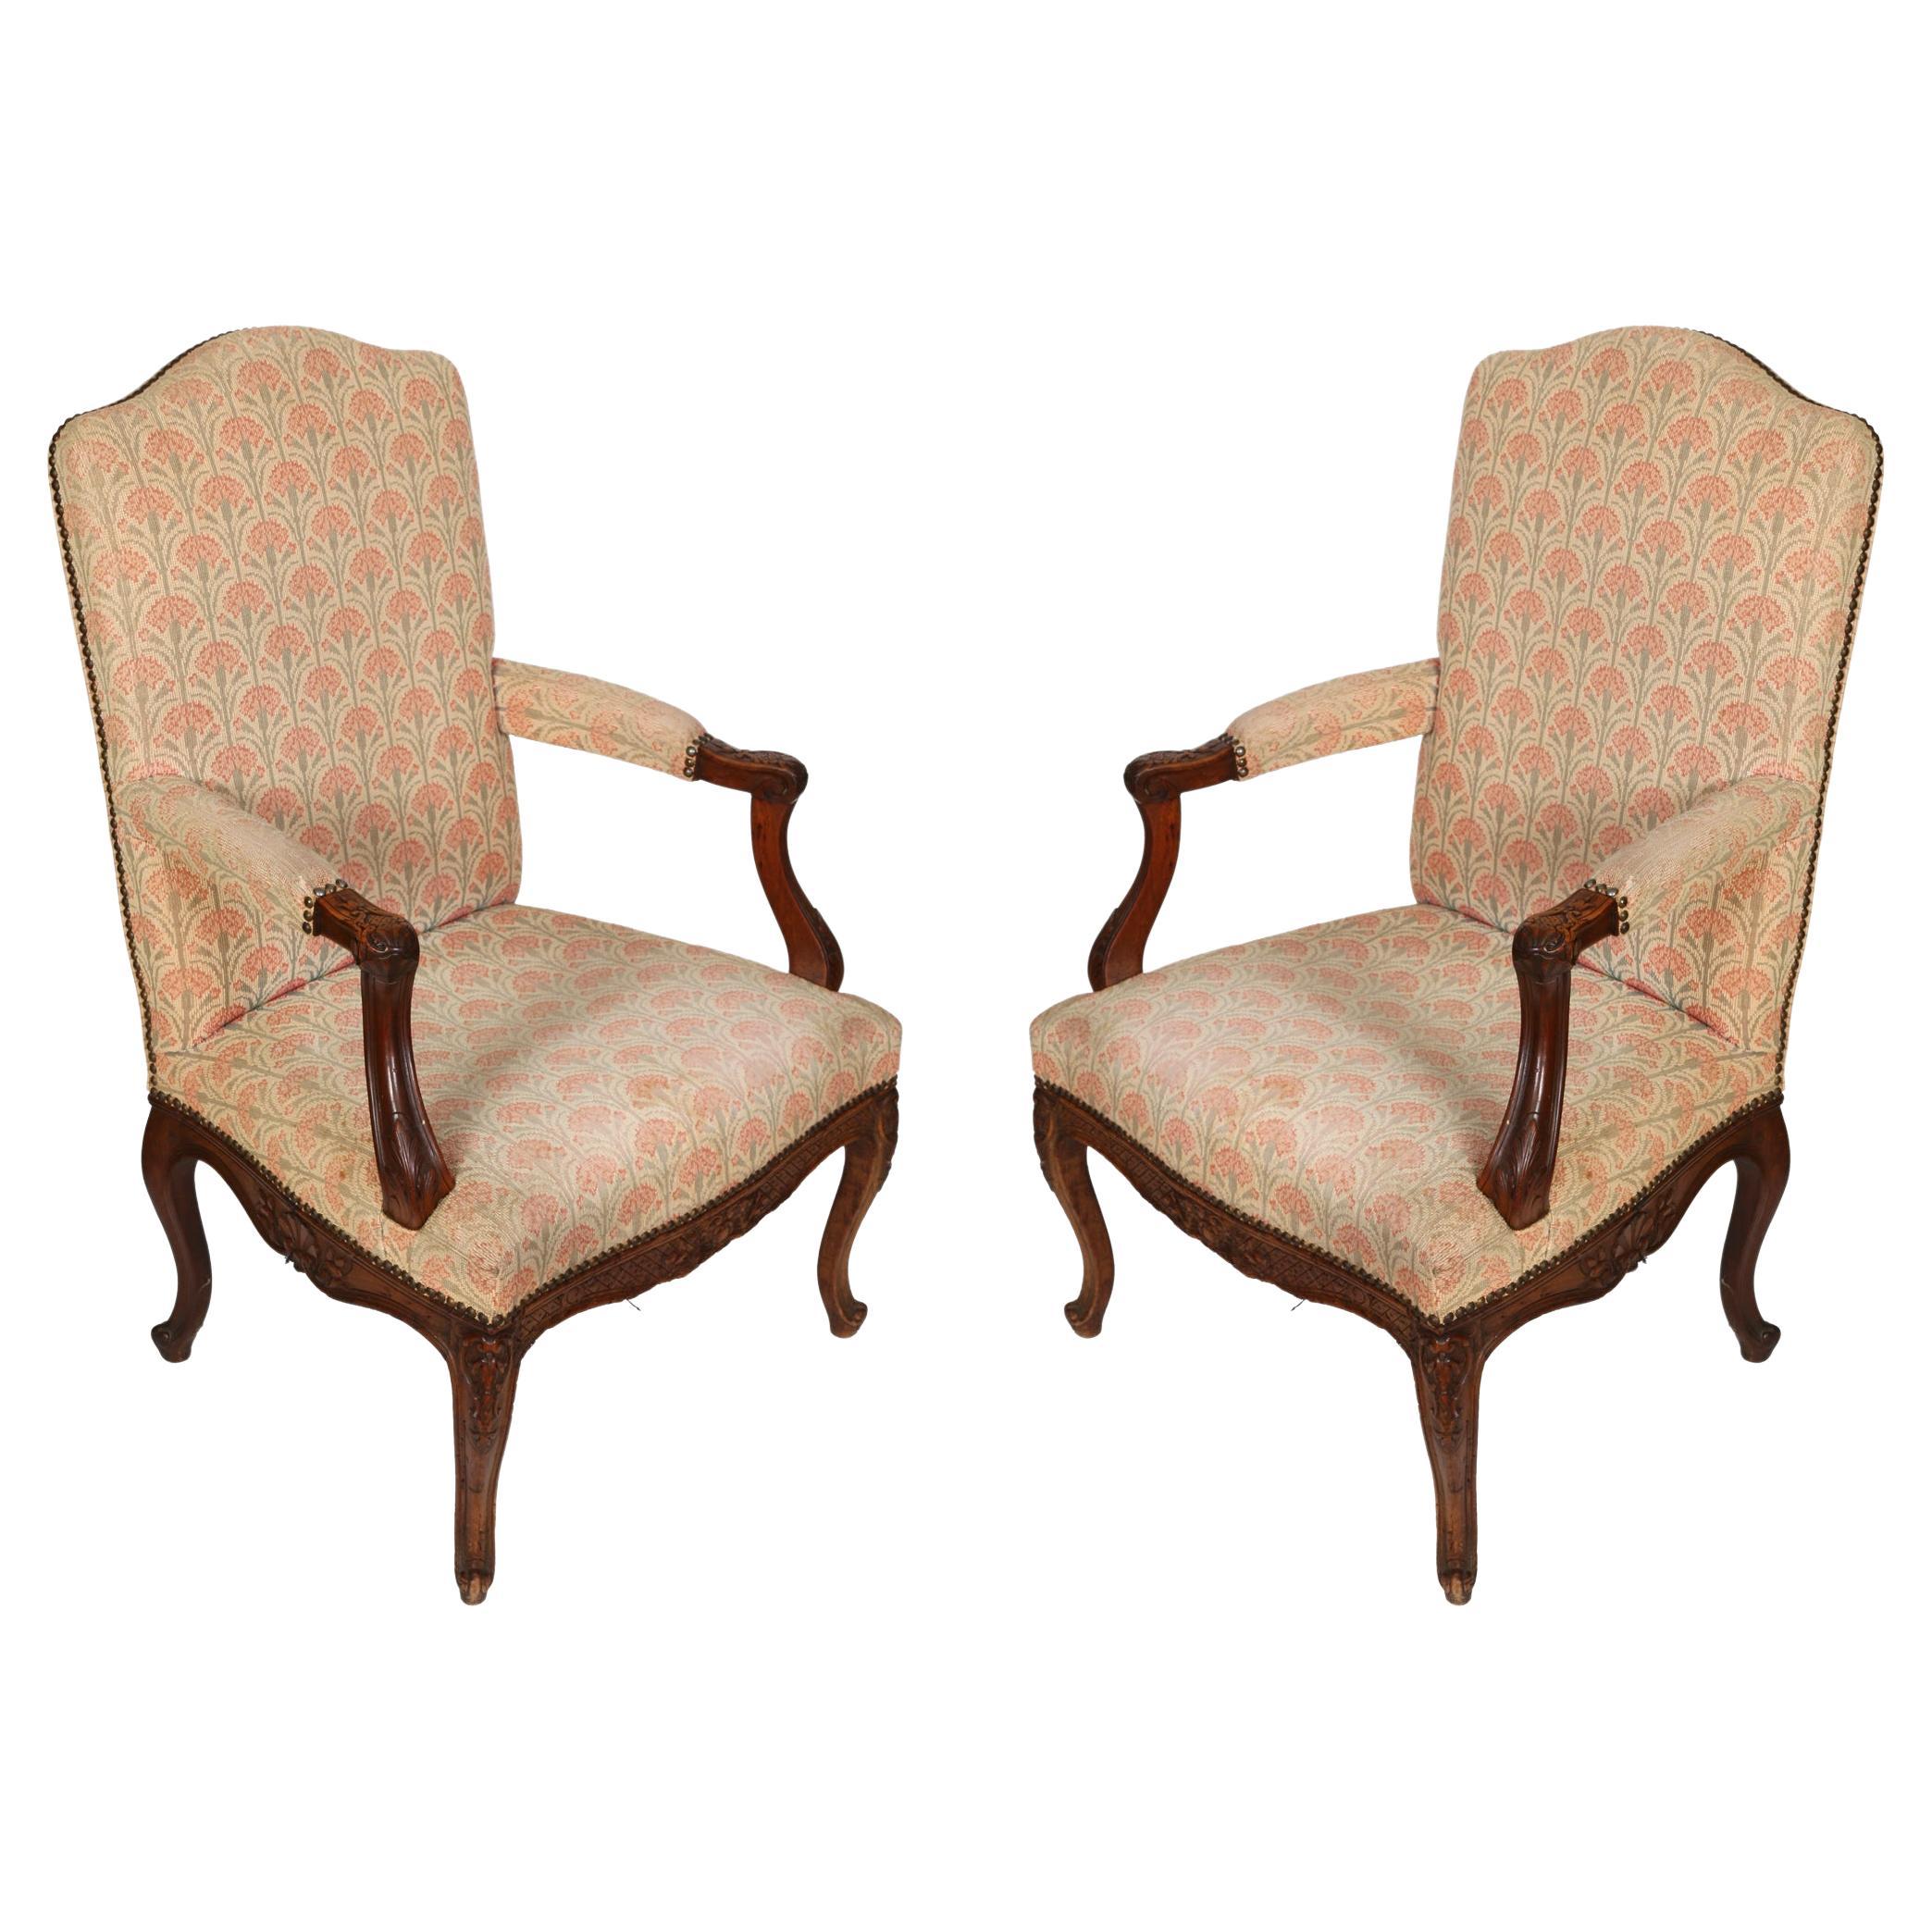 Pair of Regence Walnut Fauteuils in Carnation Petit Point Tapestry For Sale